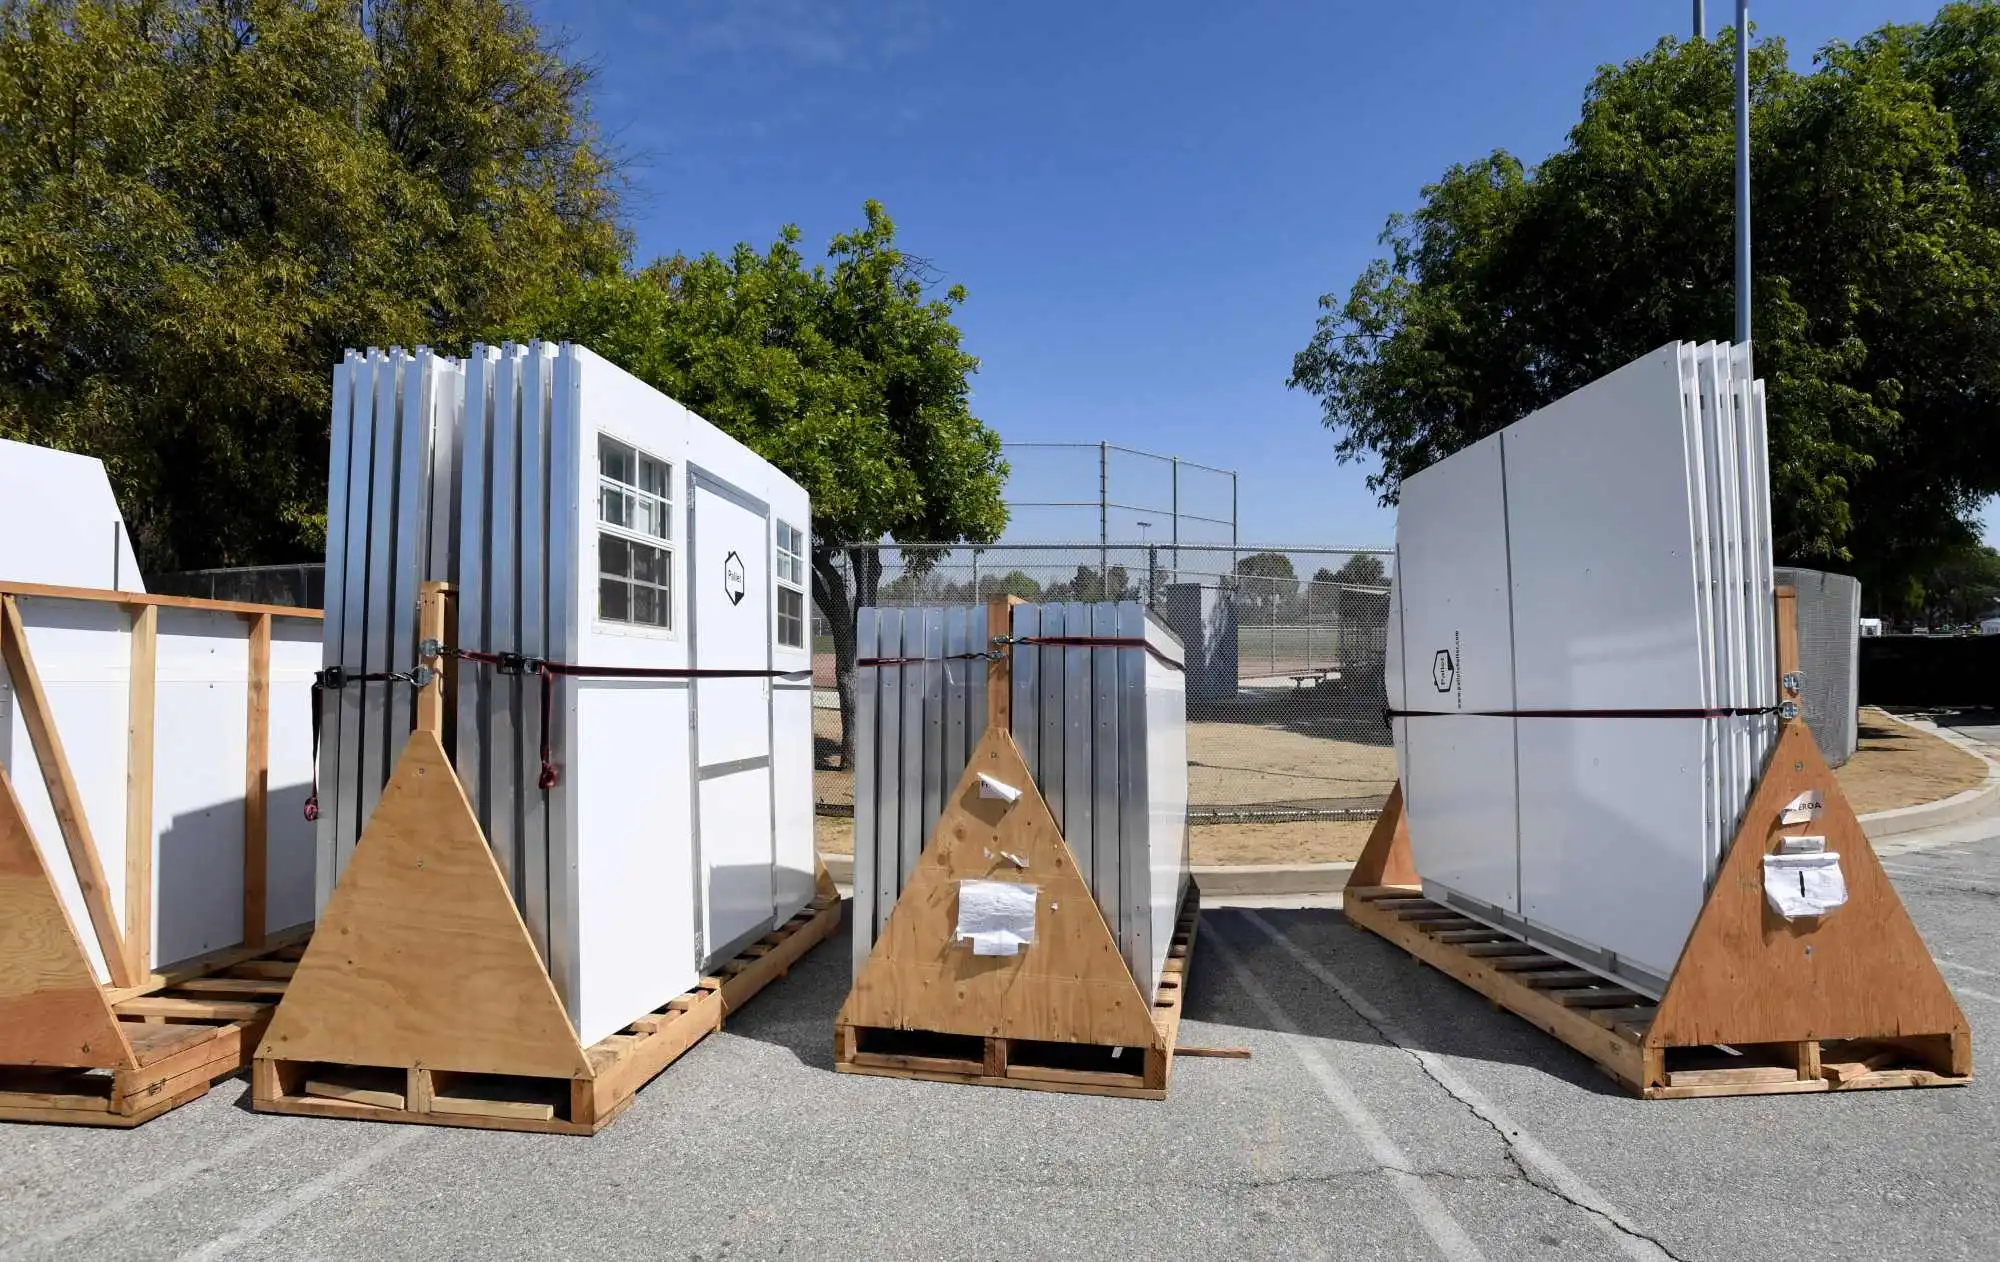 Hahn Secures $450K in Additional Funding for Torrance Pallet Shelter Project